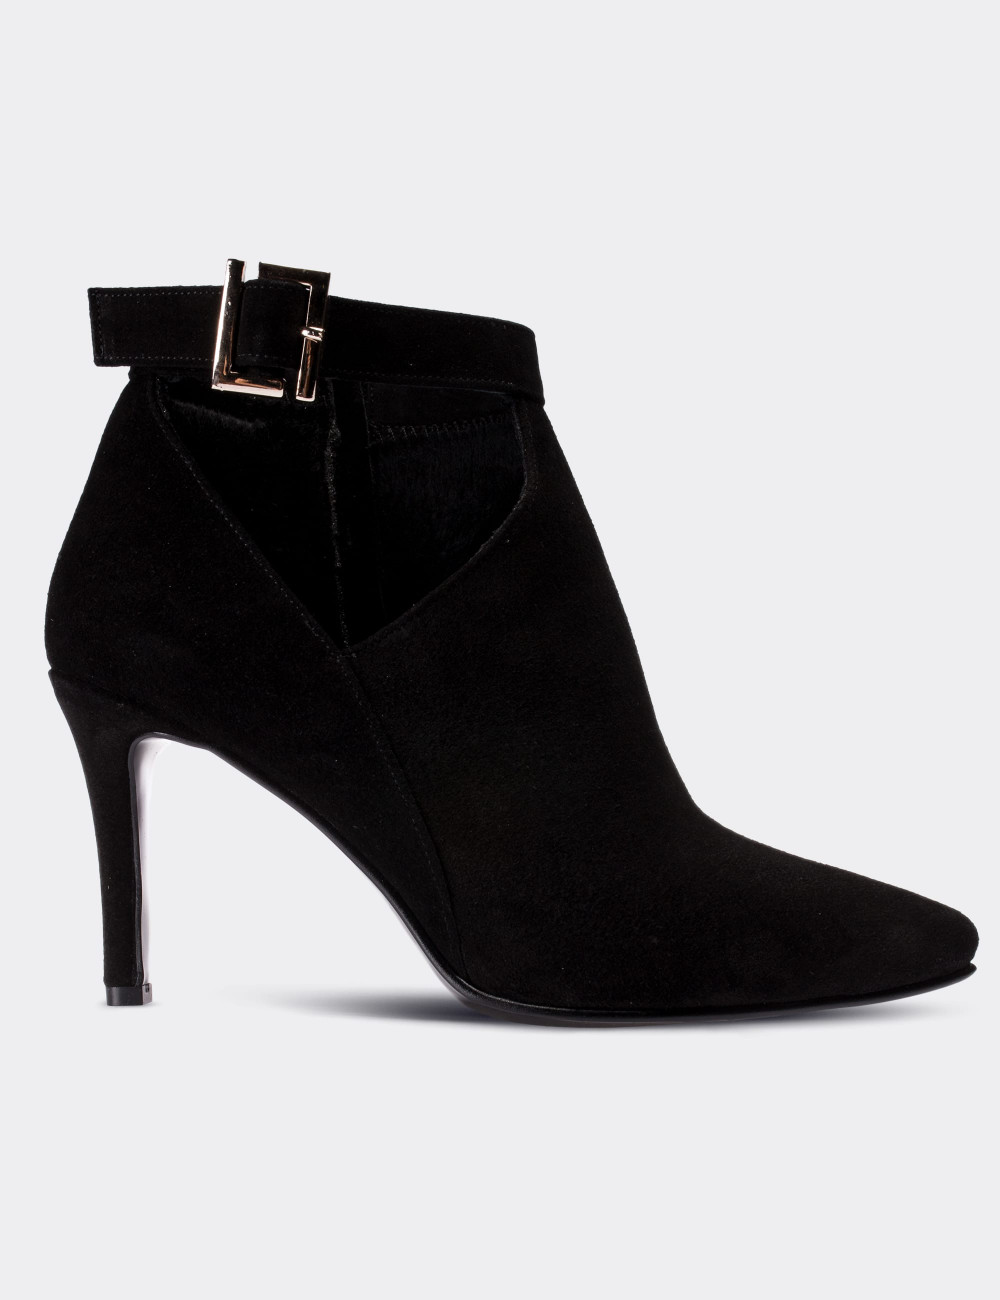 Black Suede Leather Boots - 02046ZSYHN01